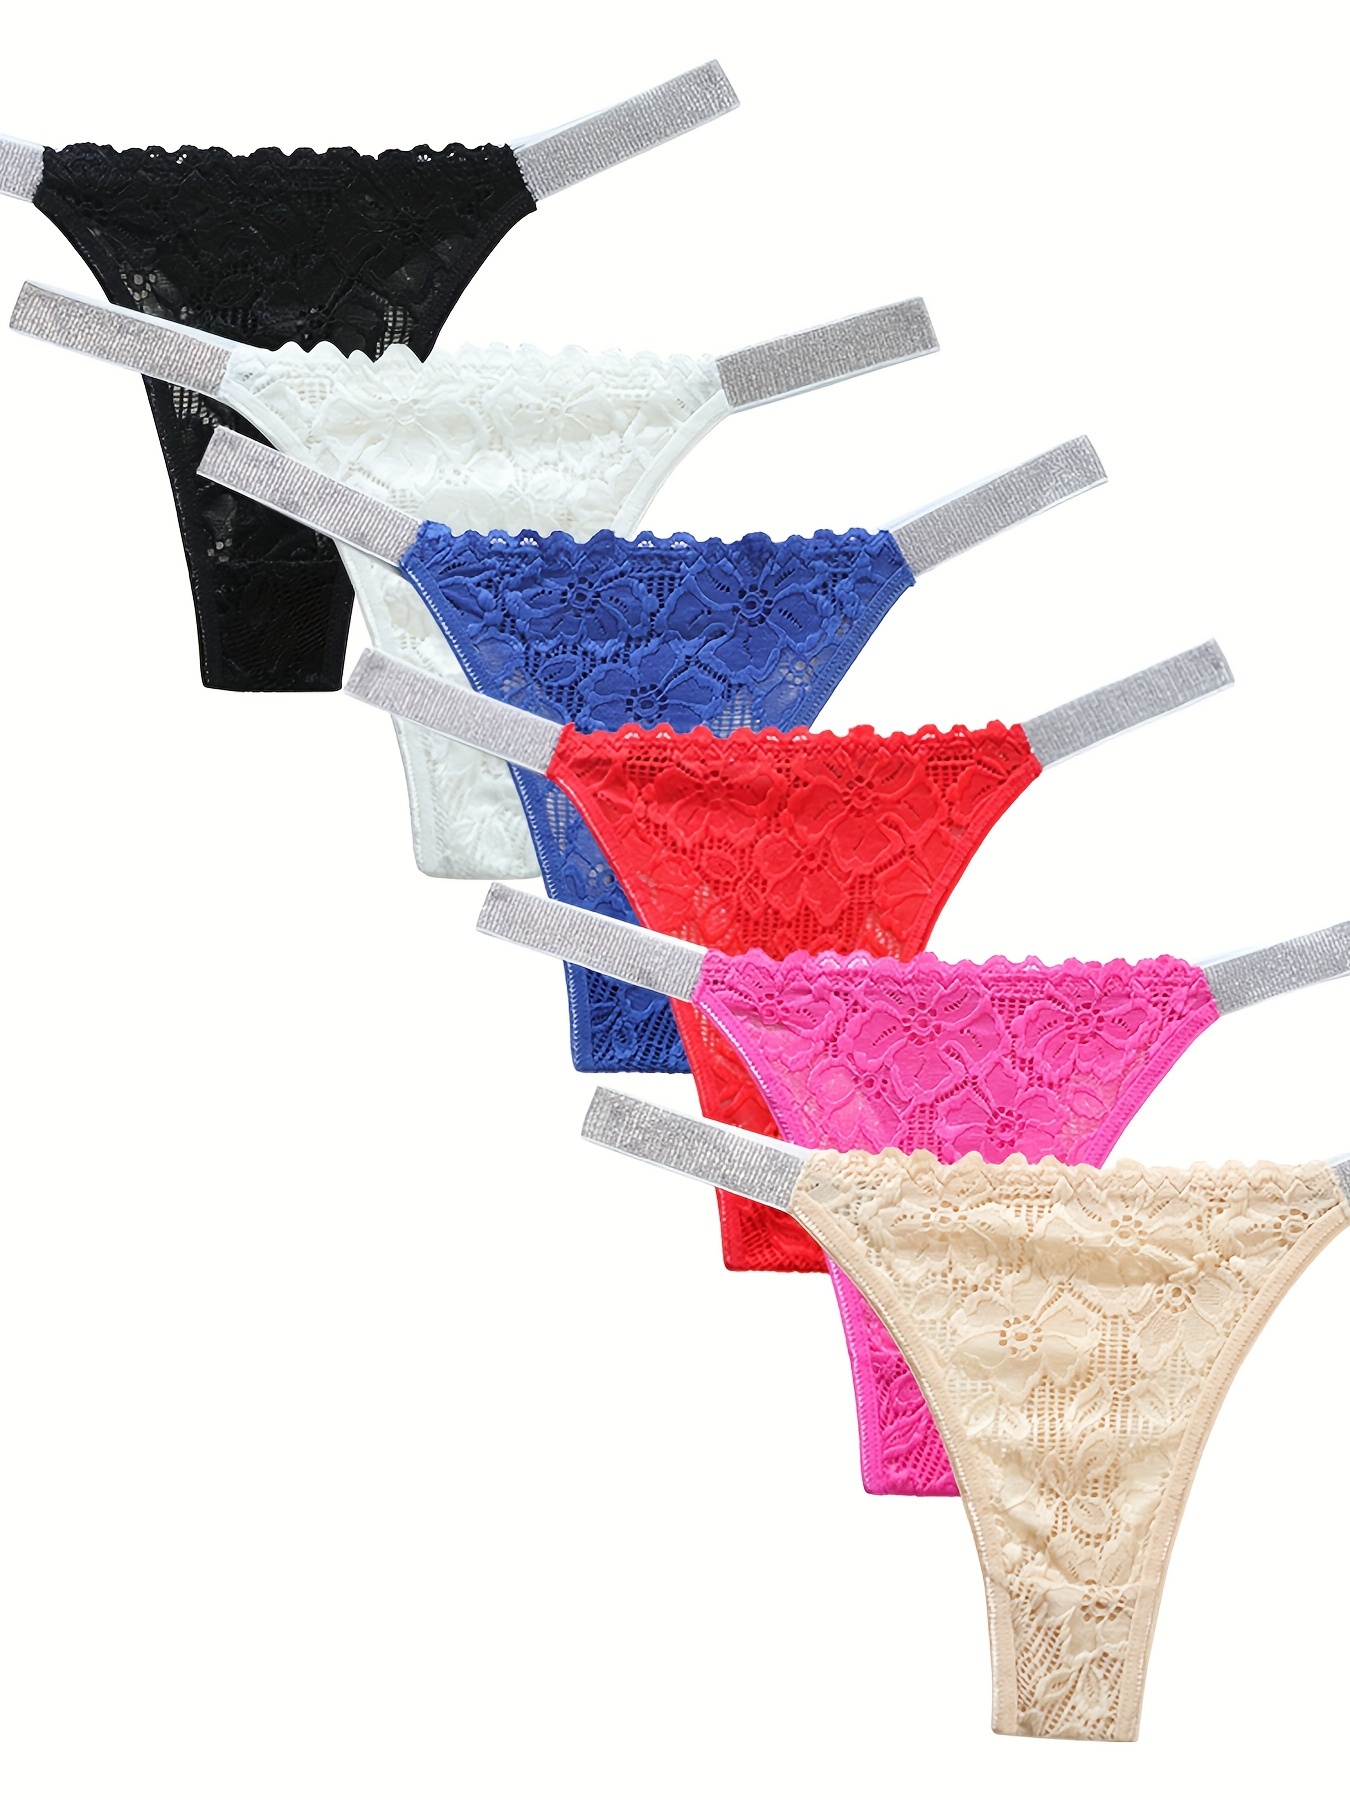 7 Pcs Sexy Days Of The Week Underpants Colorful Lace Thongs, Solid Color V  String Ring Semi-Sheer Lace Thongs, Women's Lingerie & Underwear